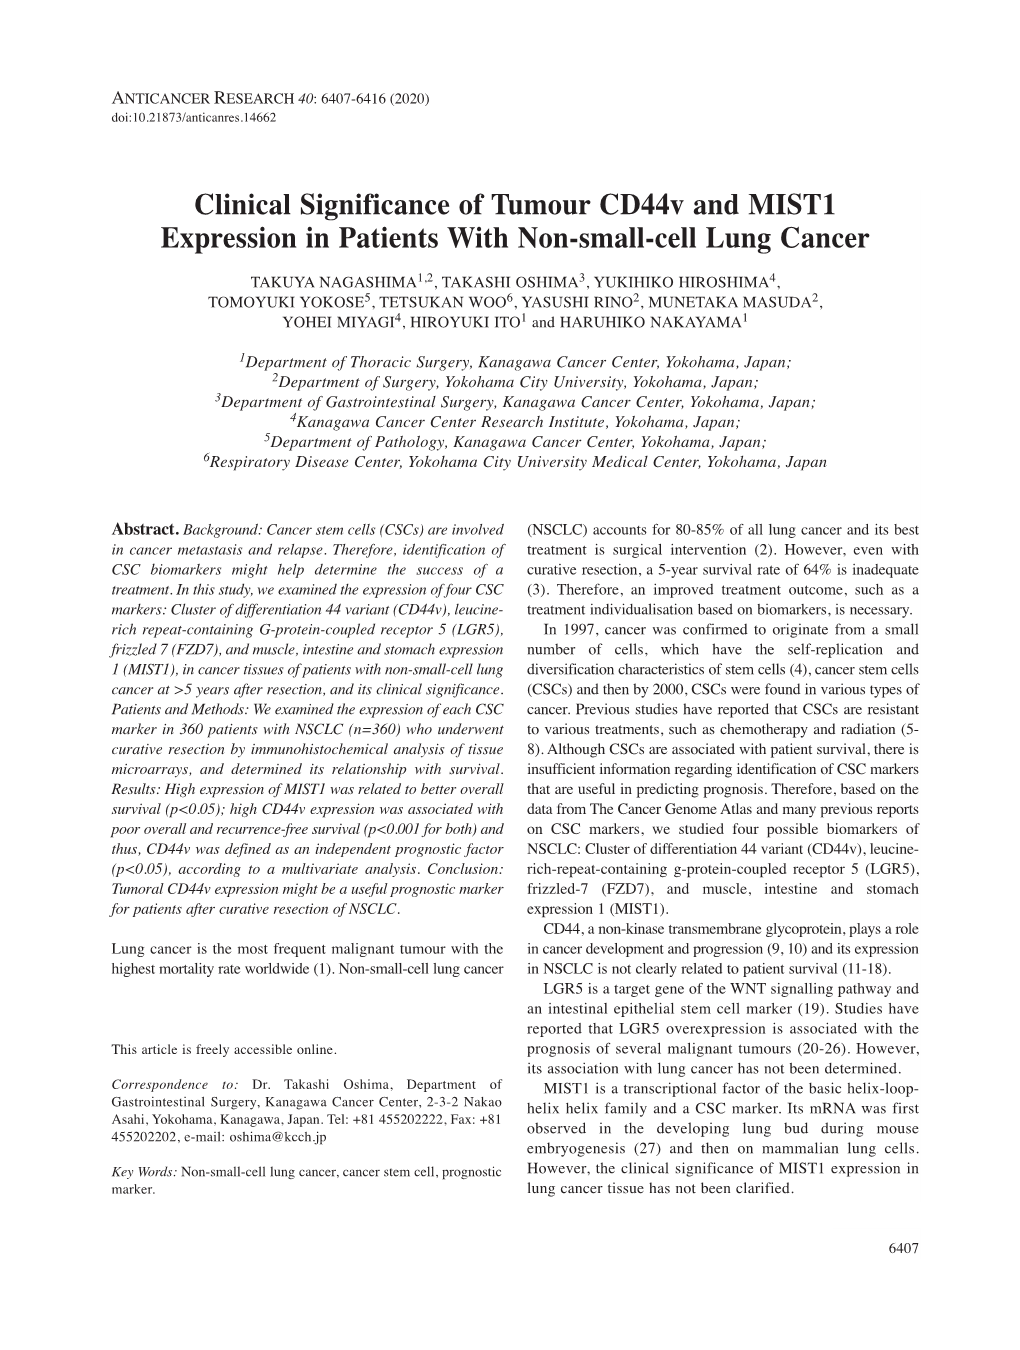 Clinical Significance of Tumour Cd44v and MIST1 Expression In